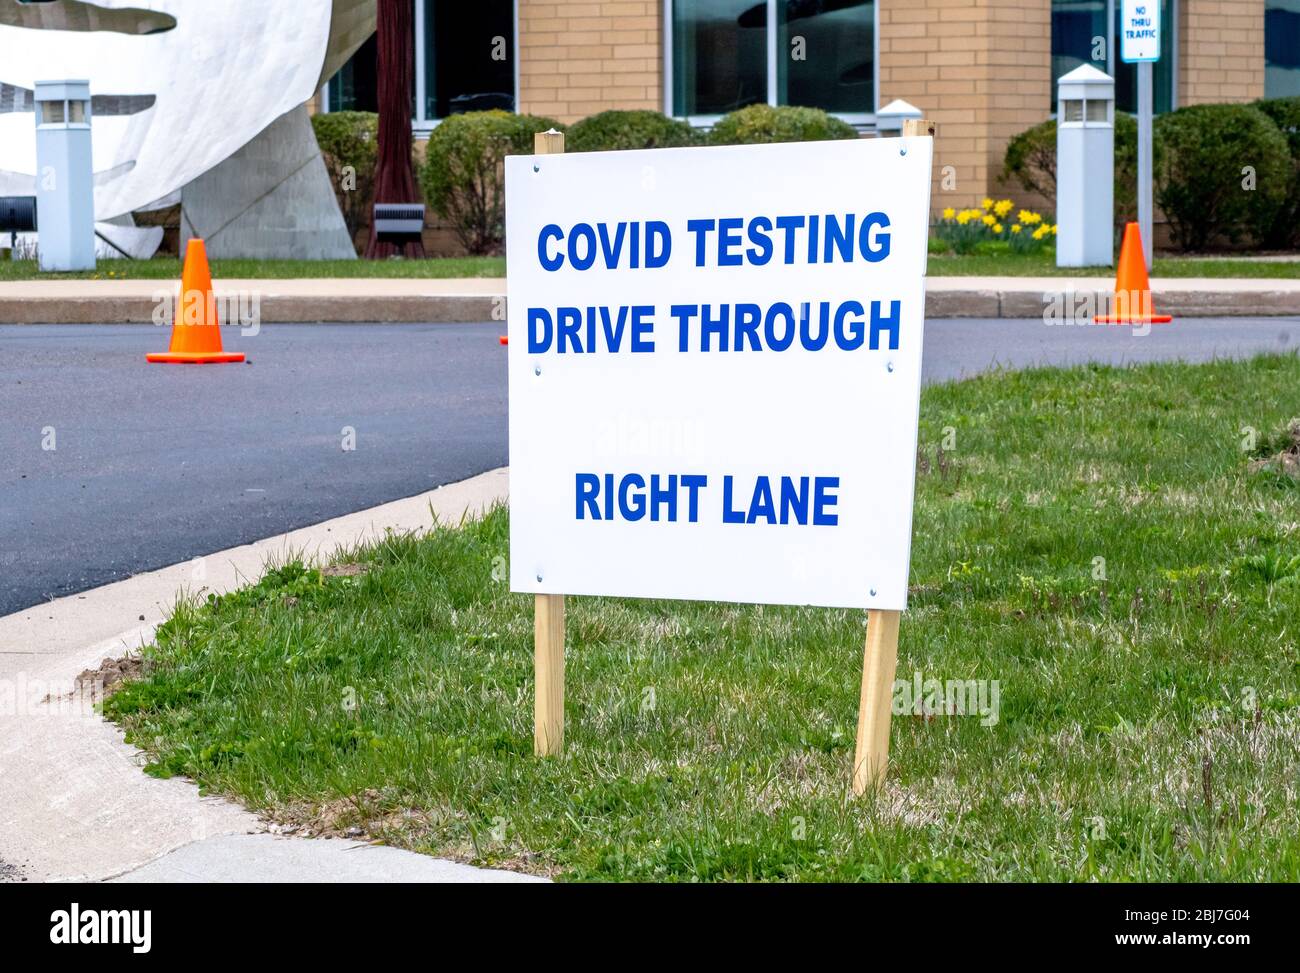 Benton Harbor Michigan USA April 23 2020; A sign announces a drive through testing site for Covid-19 in Michigan USA, one of the hardest hit areas in Stock Photo